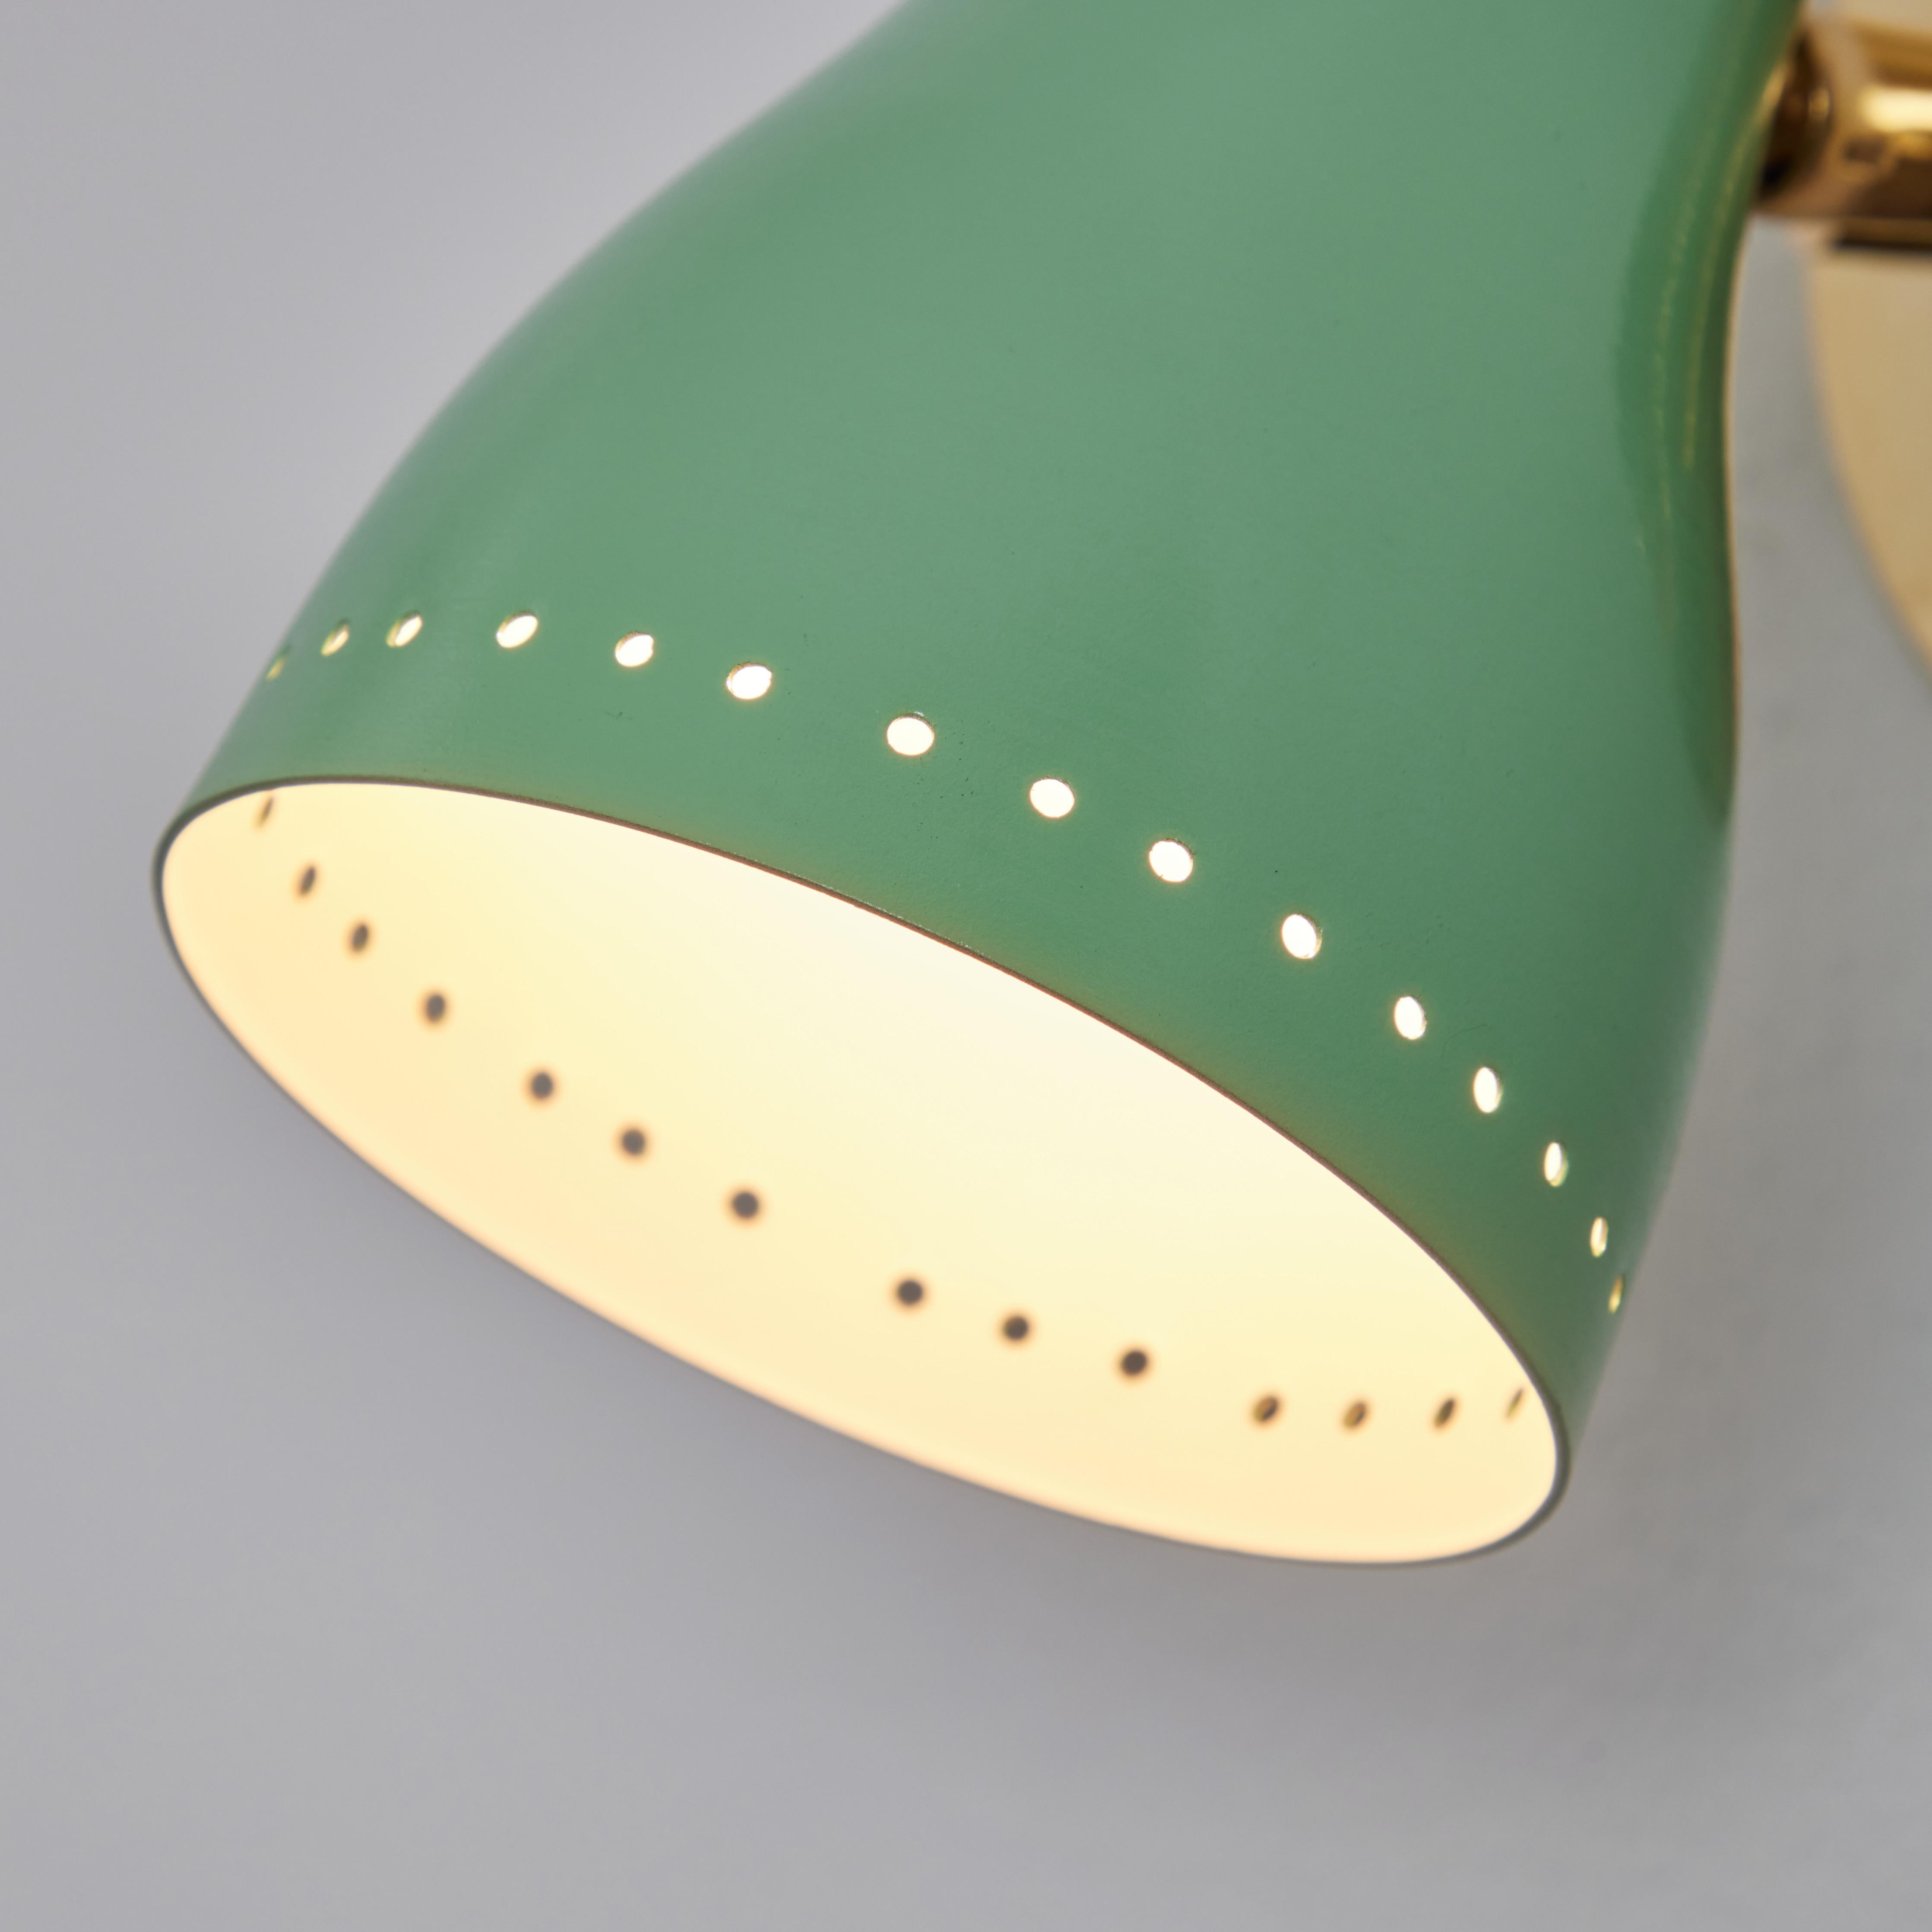 Pair of 1950s green perforated sconces attributed to Jacques Biny. A exceptionally clean and simple design executed in brass with green painted perforated metal shade with on/off switch at top. Lamps rotate freely on adjustable swivel.